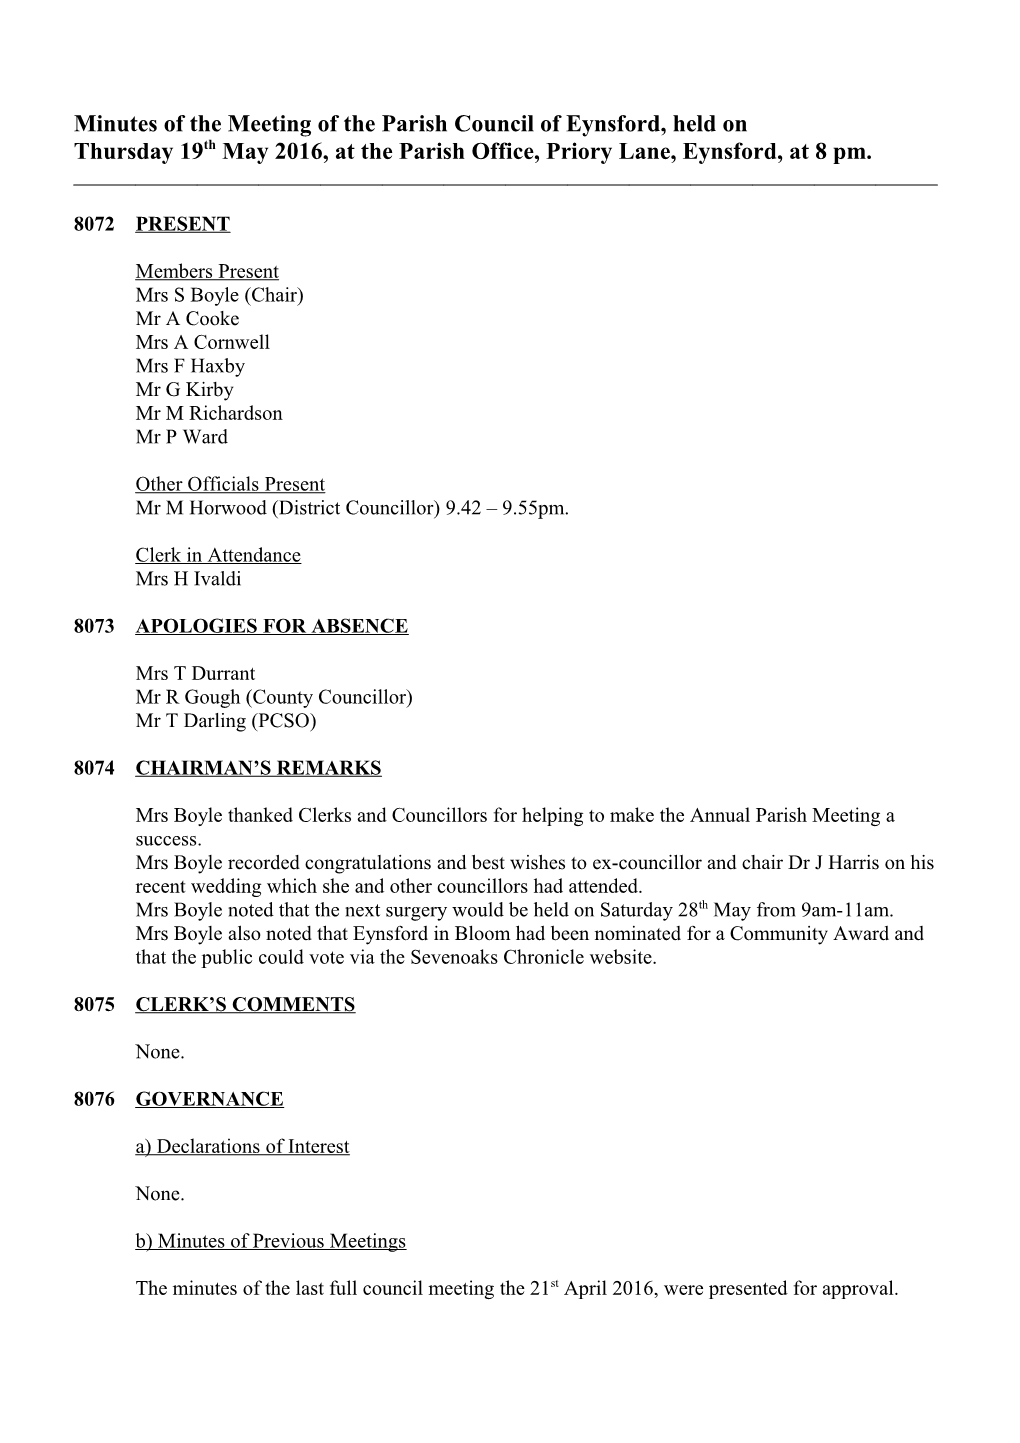 Minutes of the Meeting of the Parish Council of Eynsford, Held on Thursday 17Th December